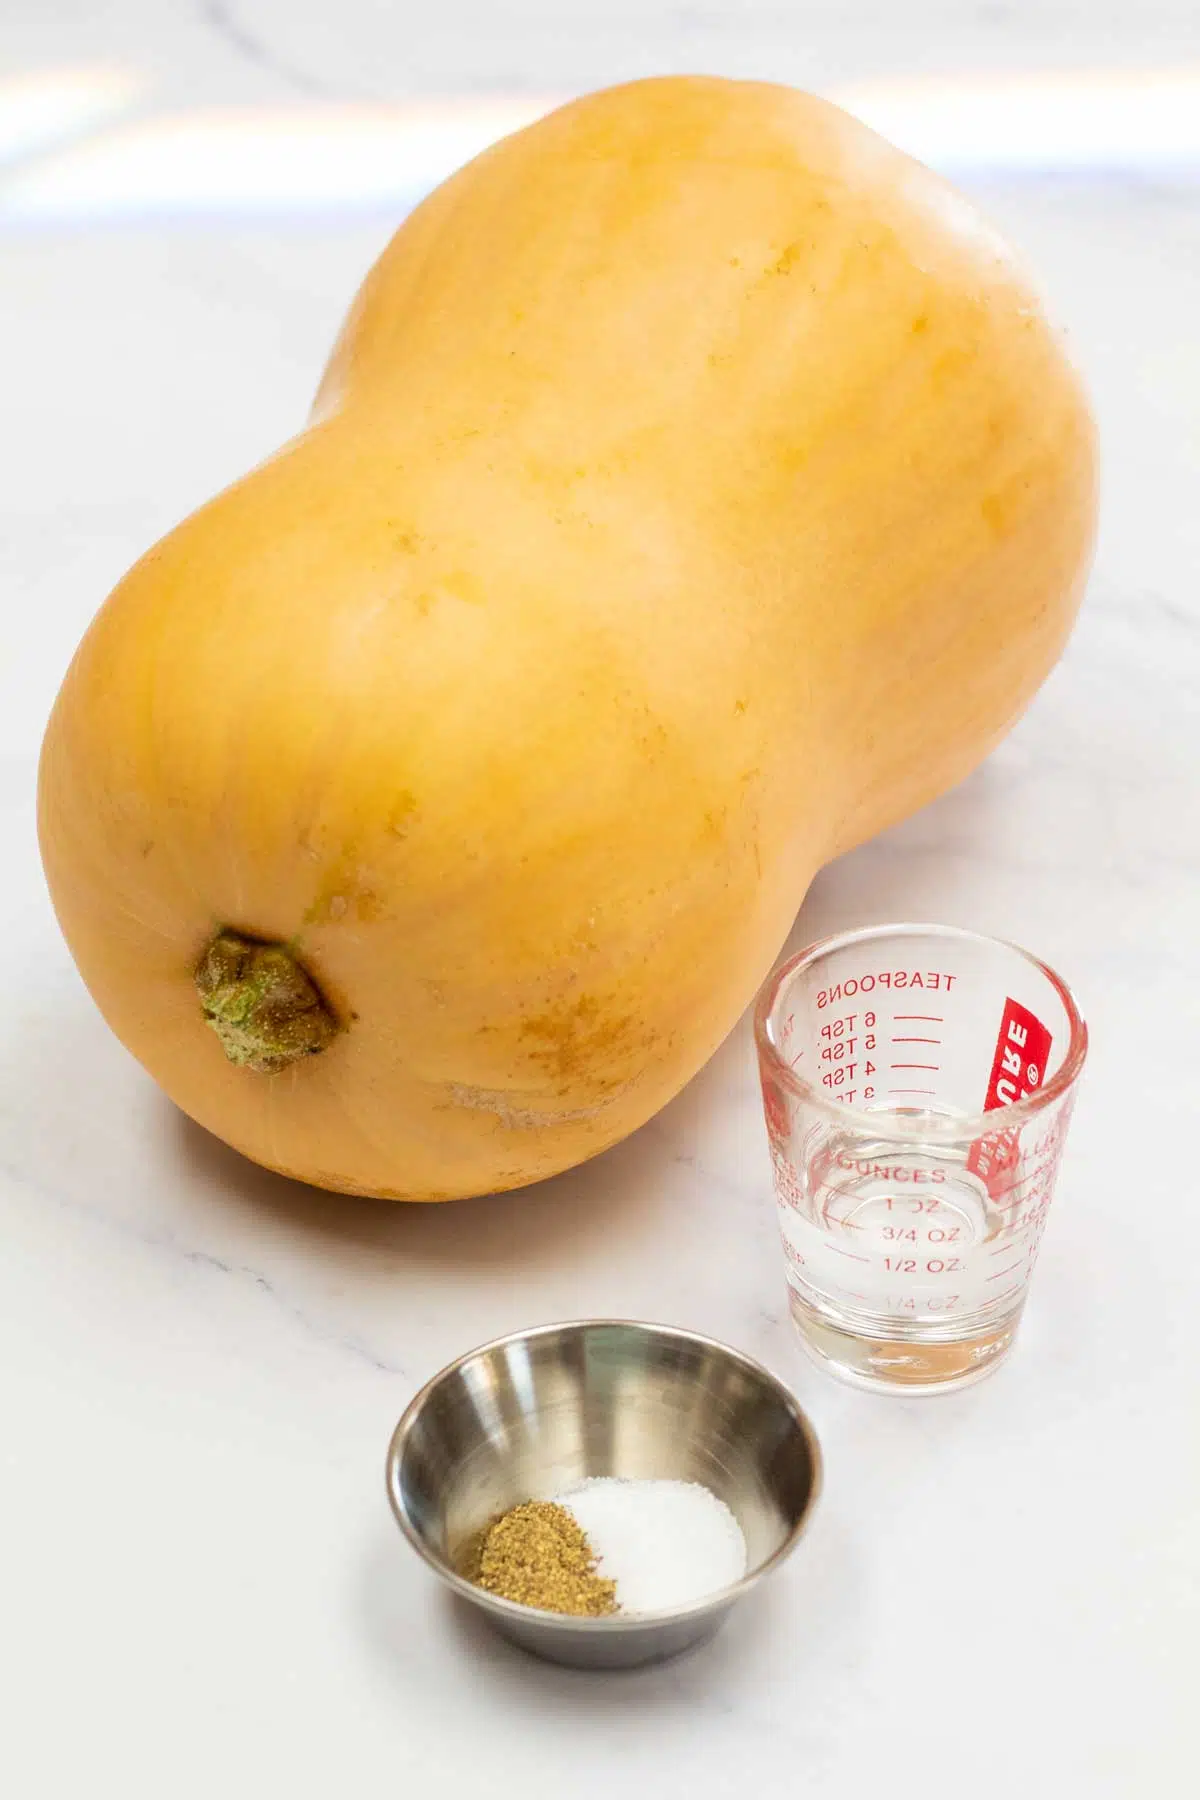 Tall image showing ingredients needed for roasted butternut squash.